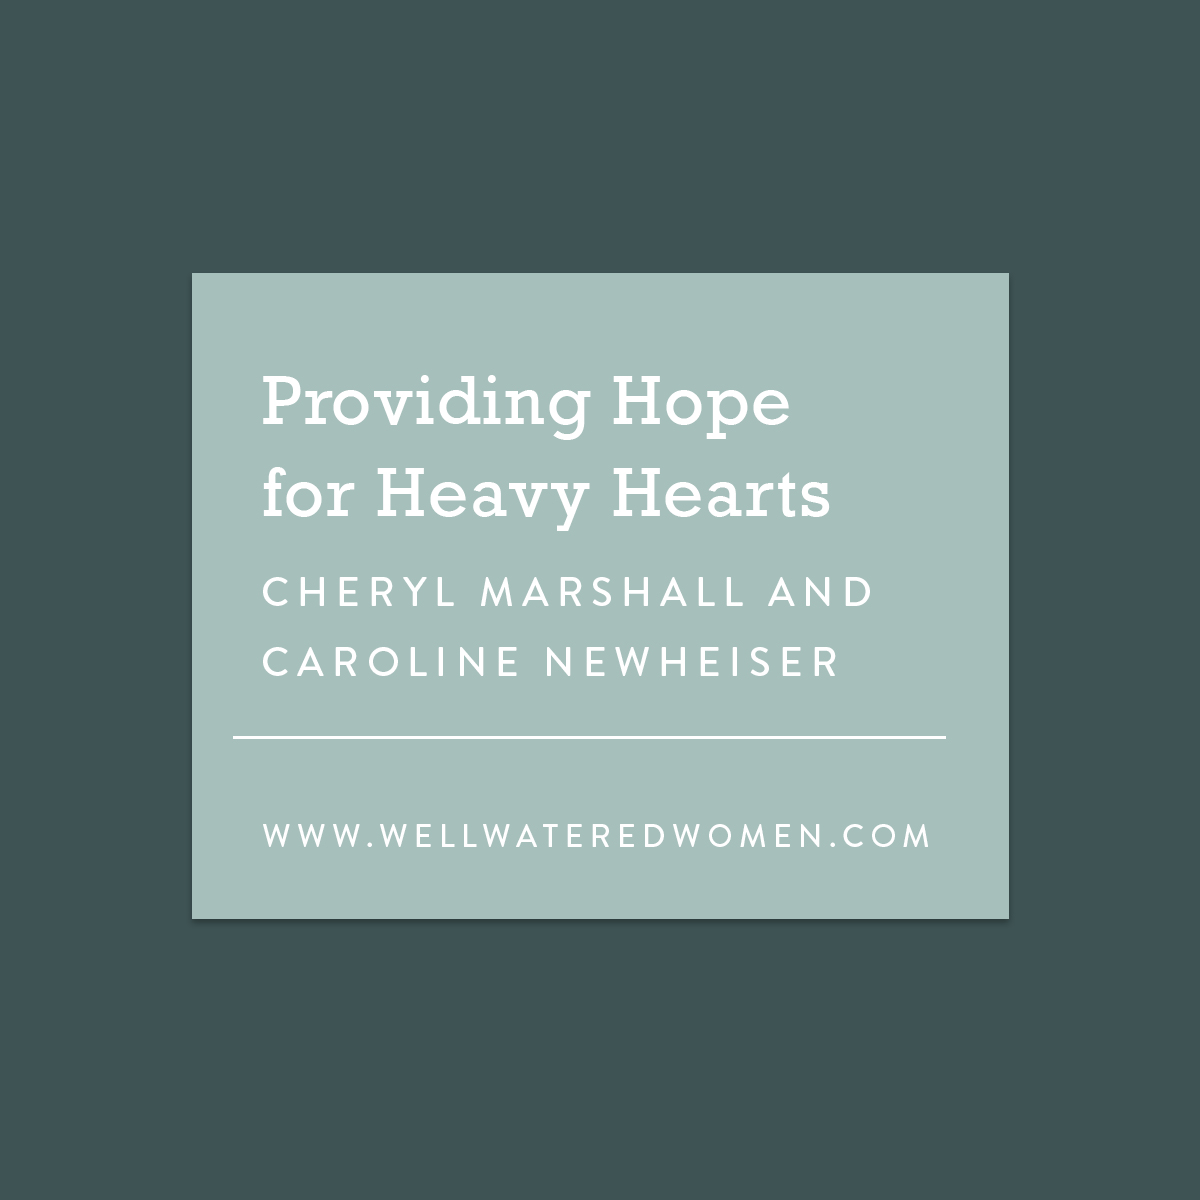 Providing Hope for Heavy Hearts - an Article from Well-Watered Women